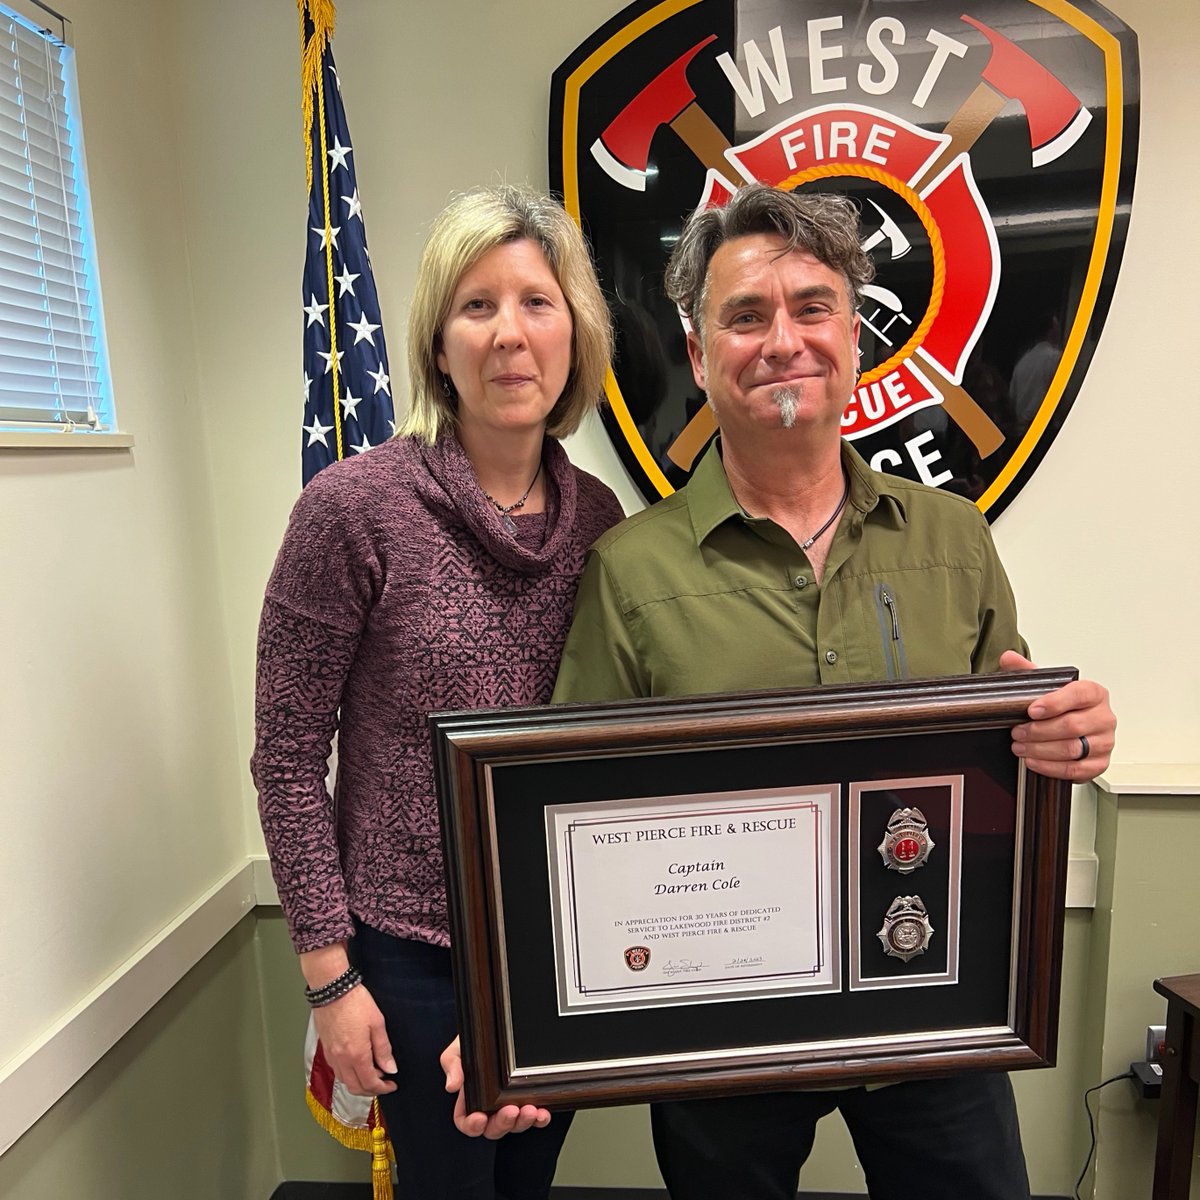 Please help us wish Captain Darren Cole good luck in his next chapter - retirement! Congratulations, Darren, and thank you for your 30 years of service to our community.